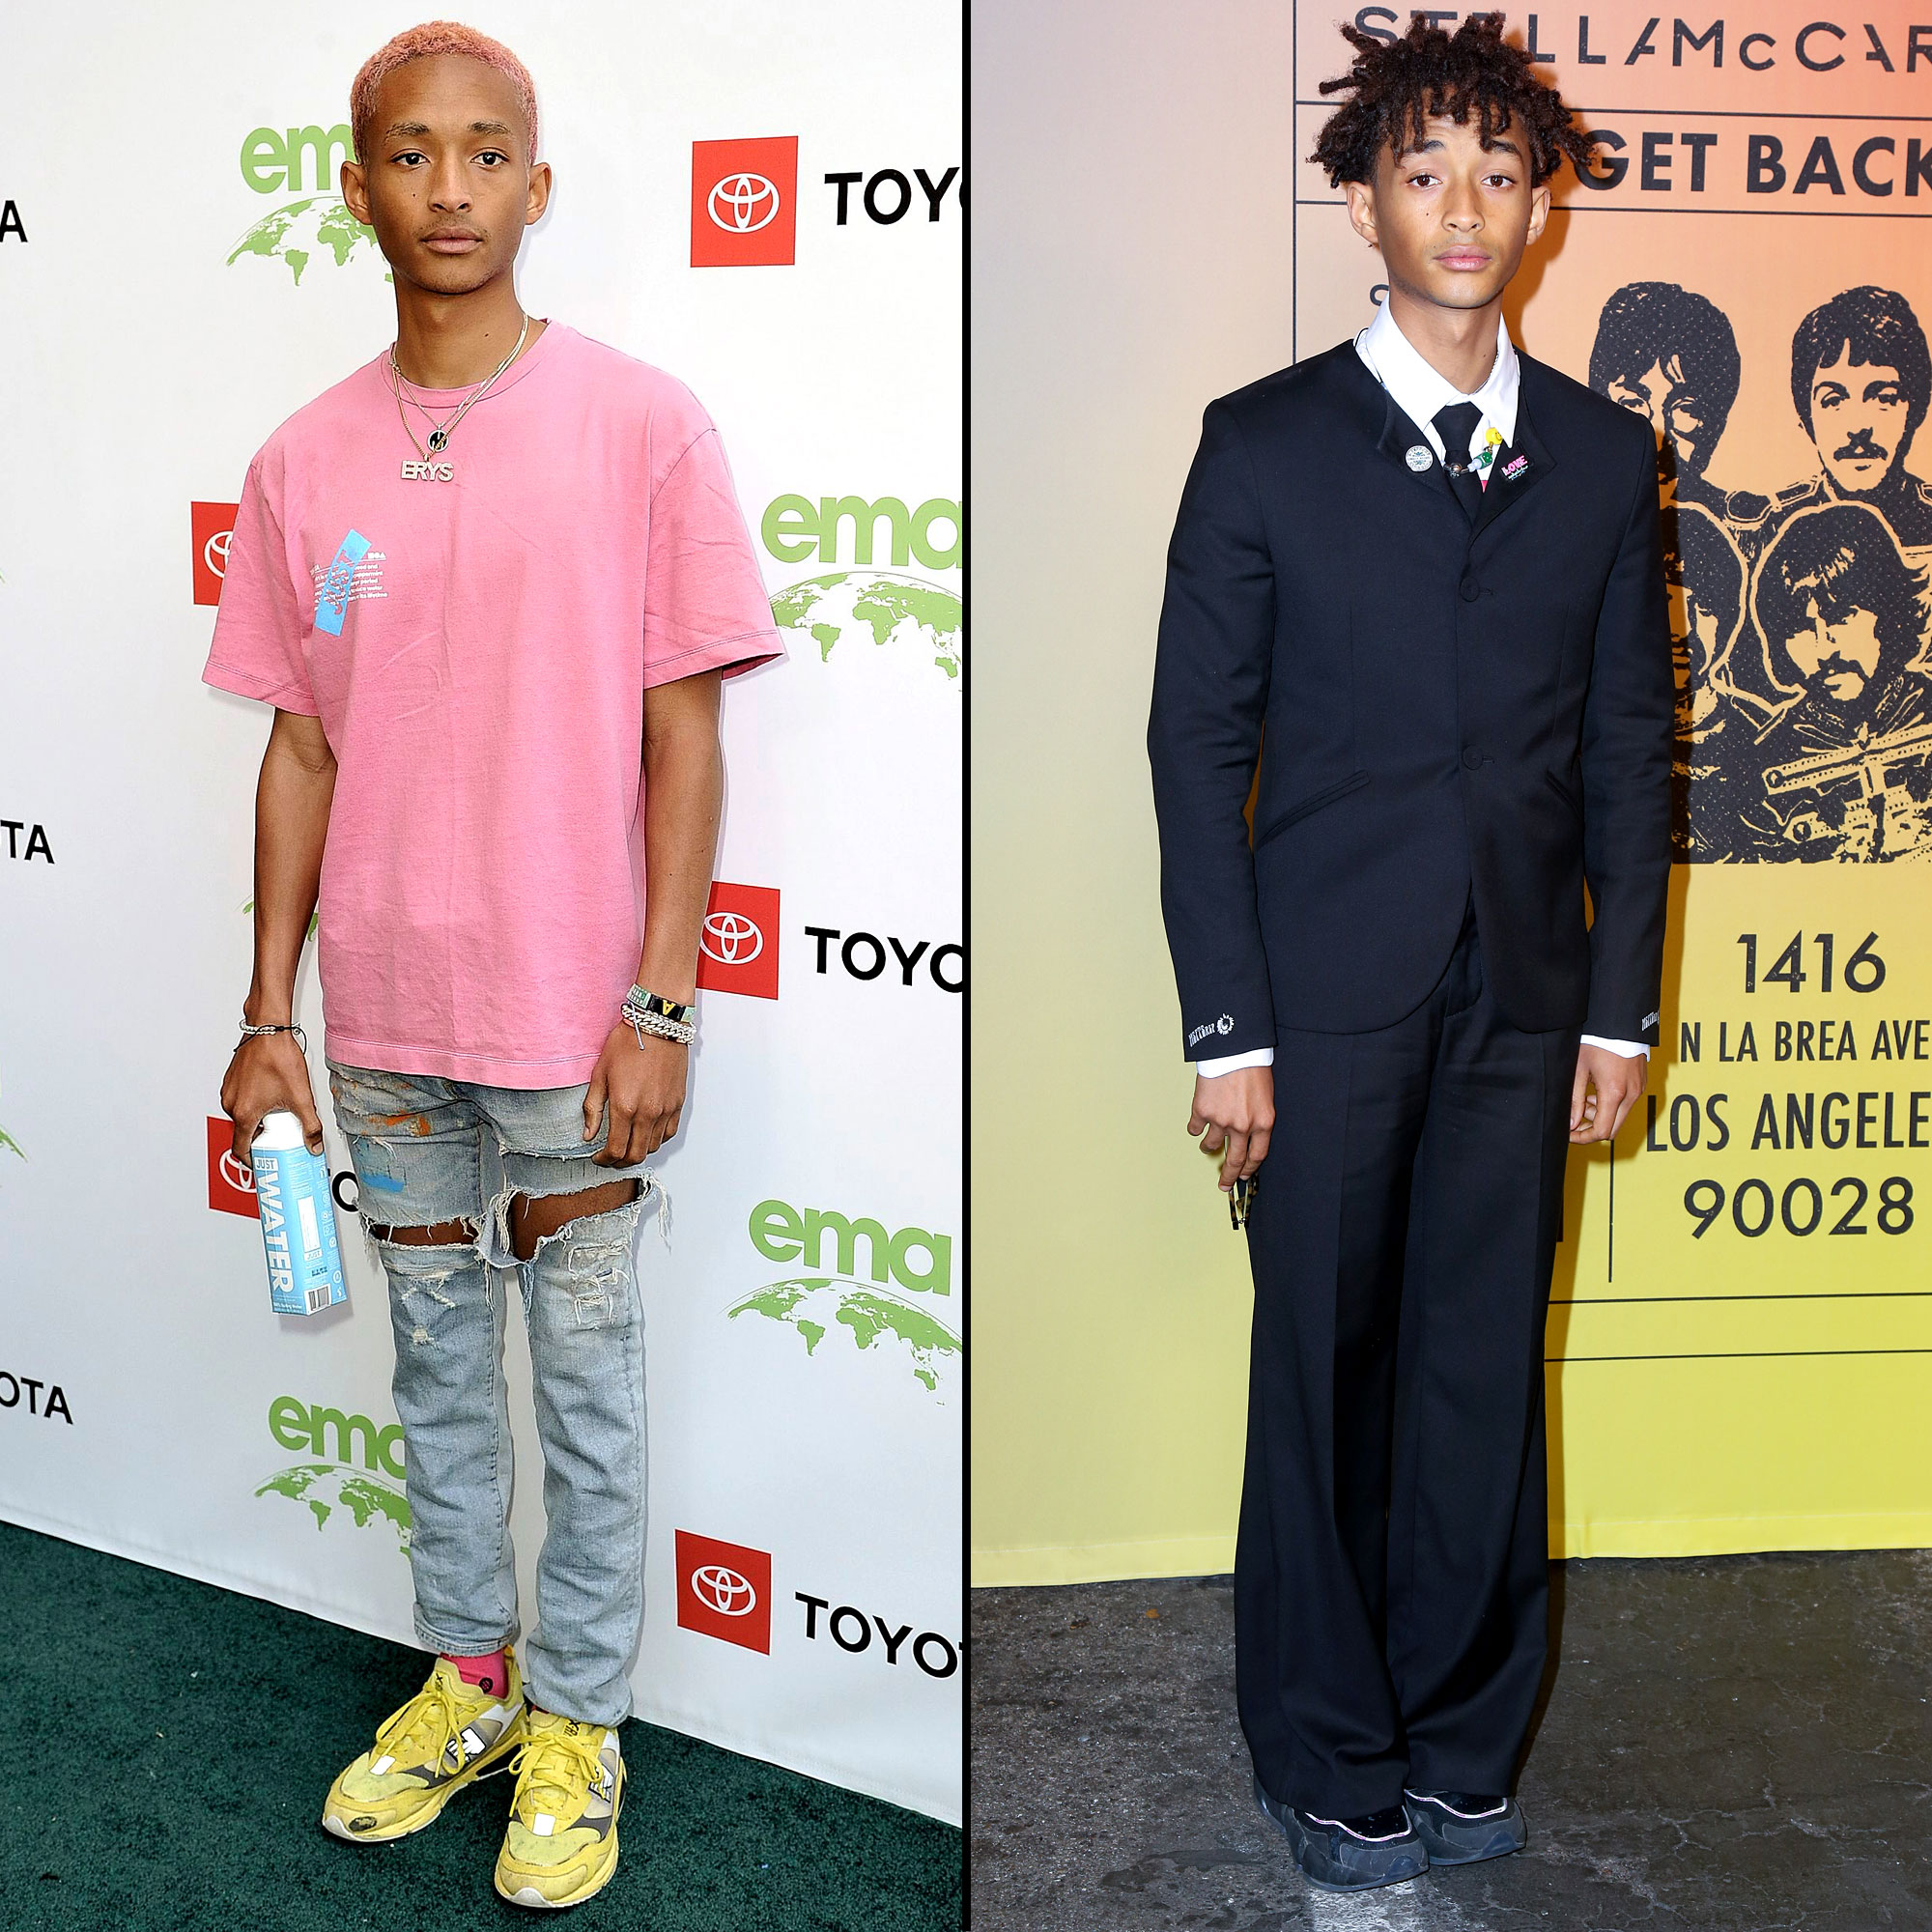 Does Jaden Smith REALLY Have Only One Pair Of Shoes? An Investigation